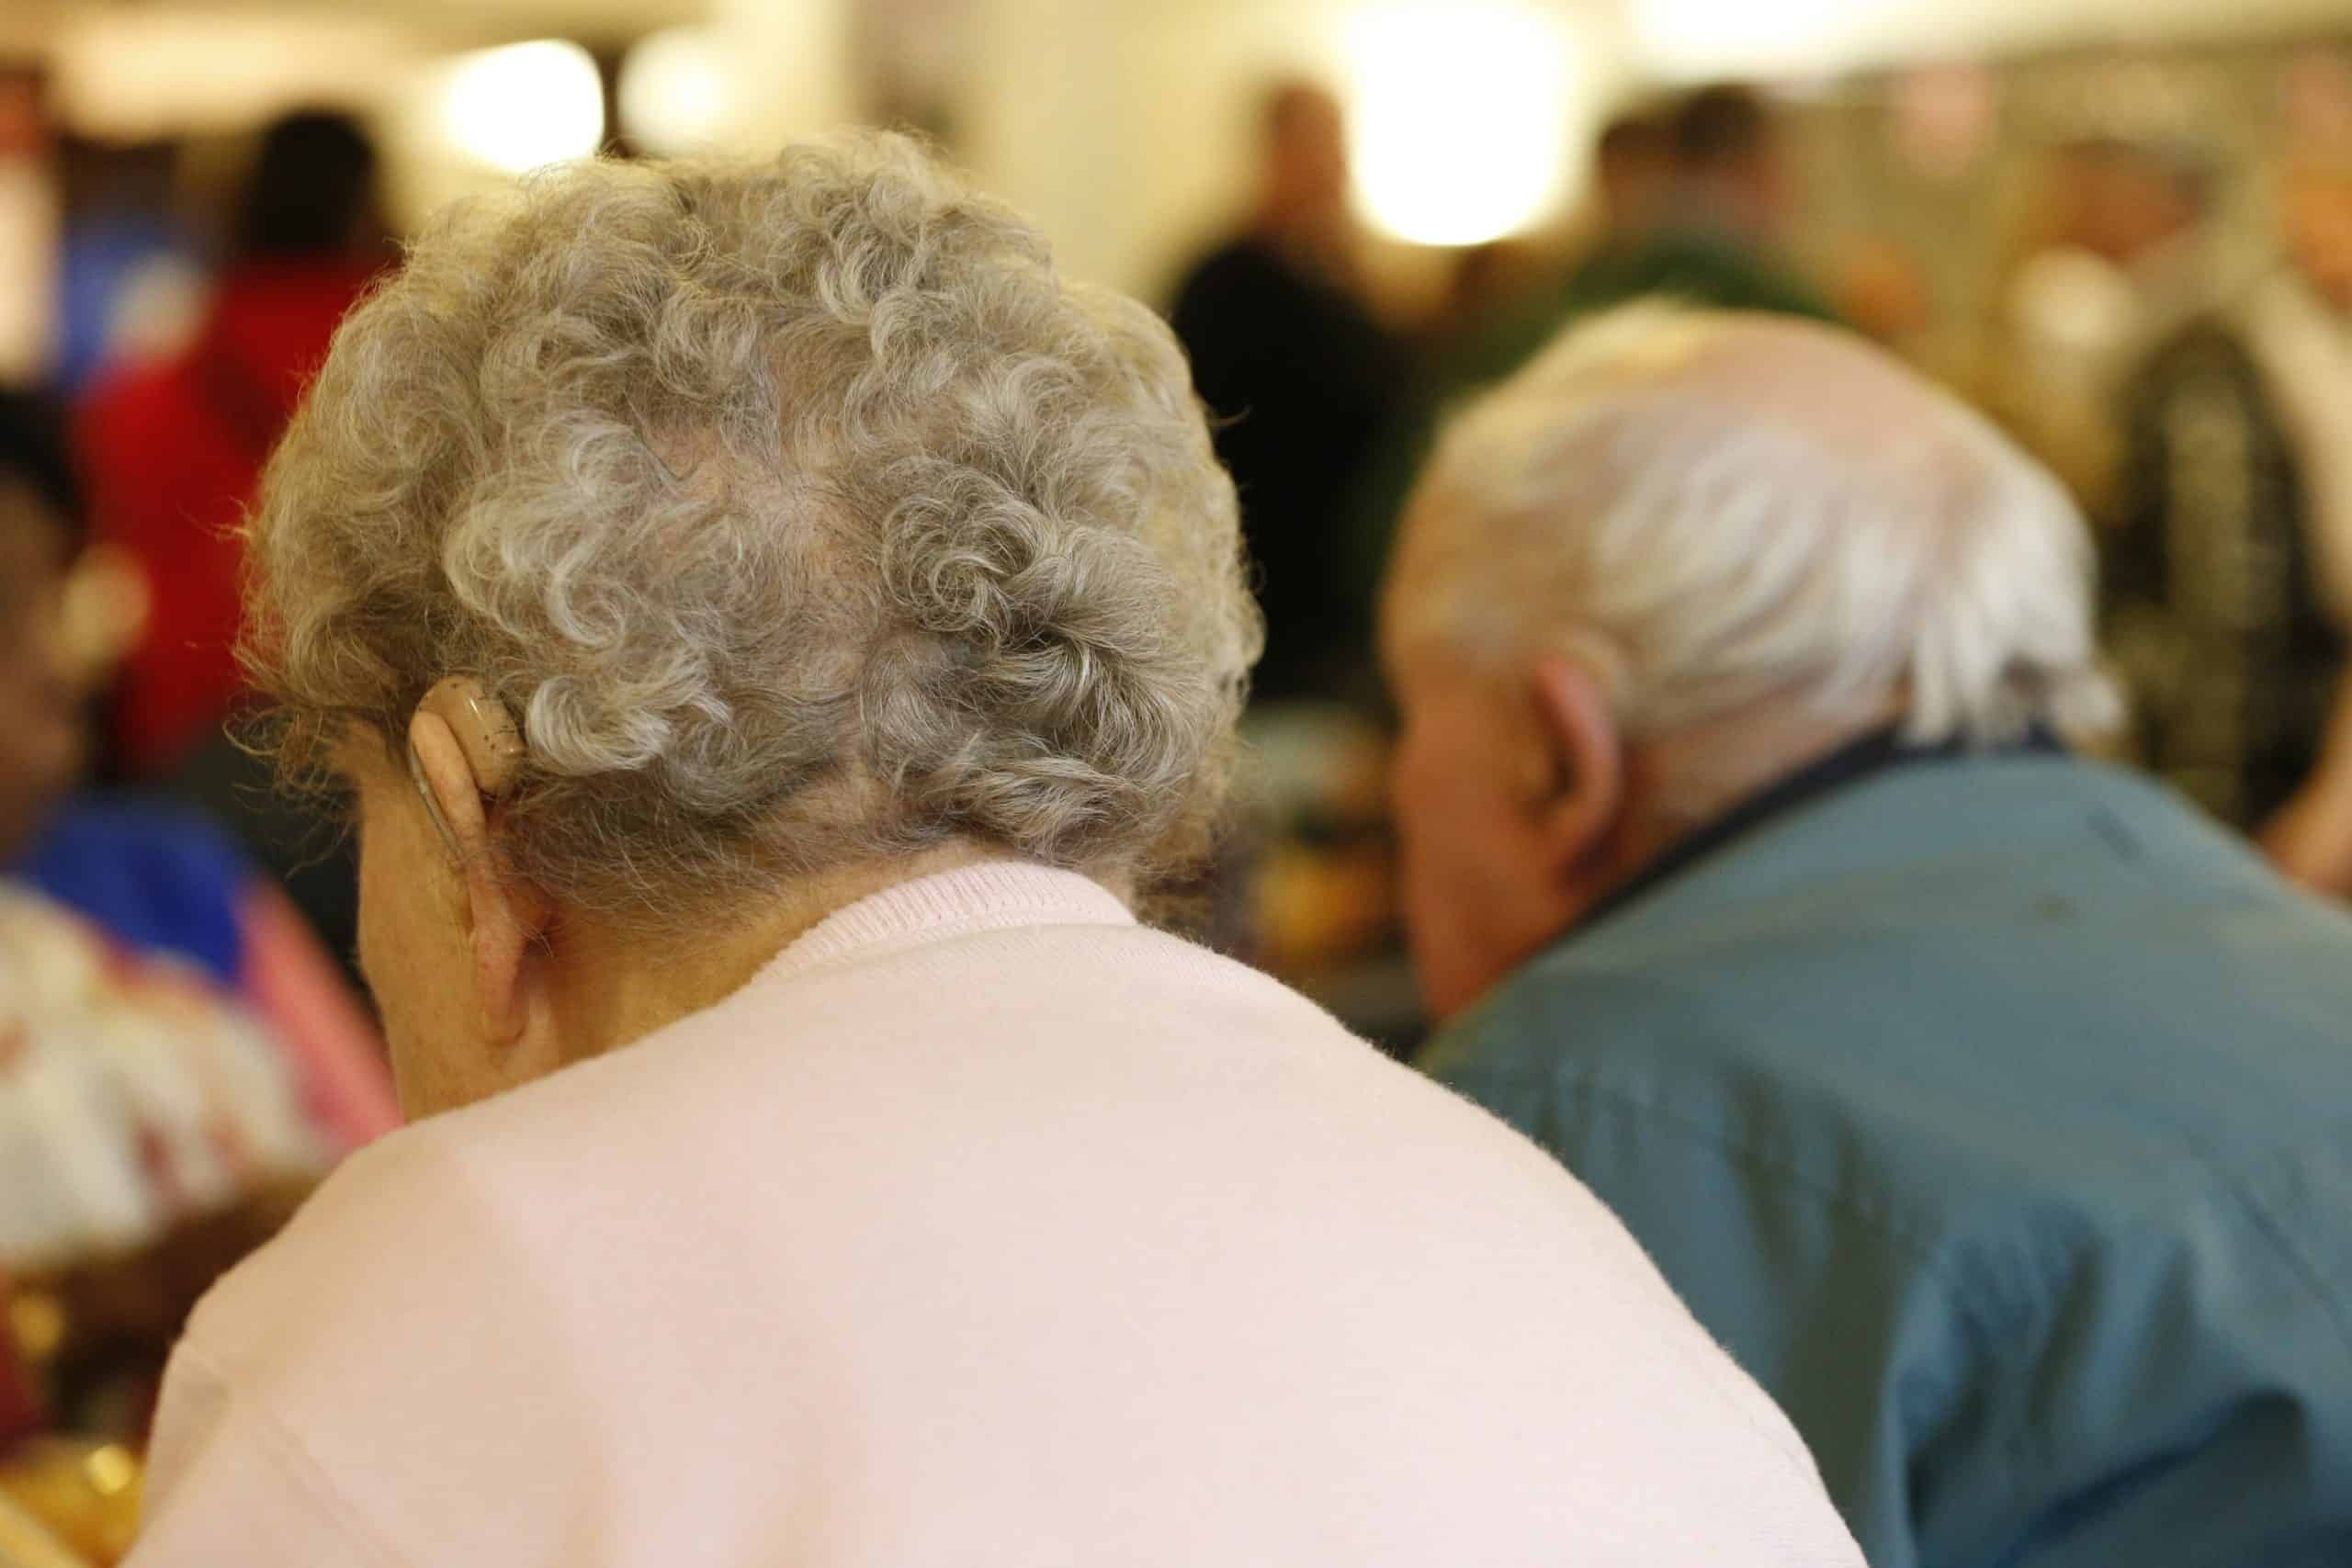 Ministers planning overseas hiring spree to save care homes